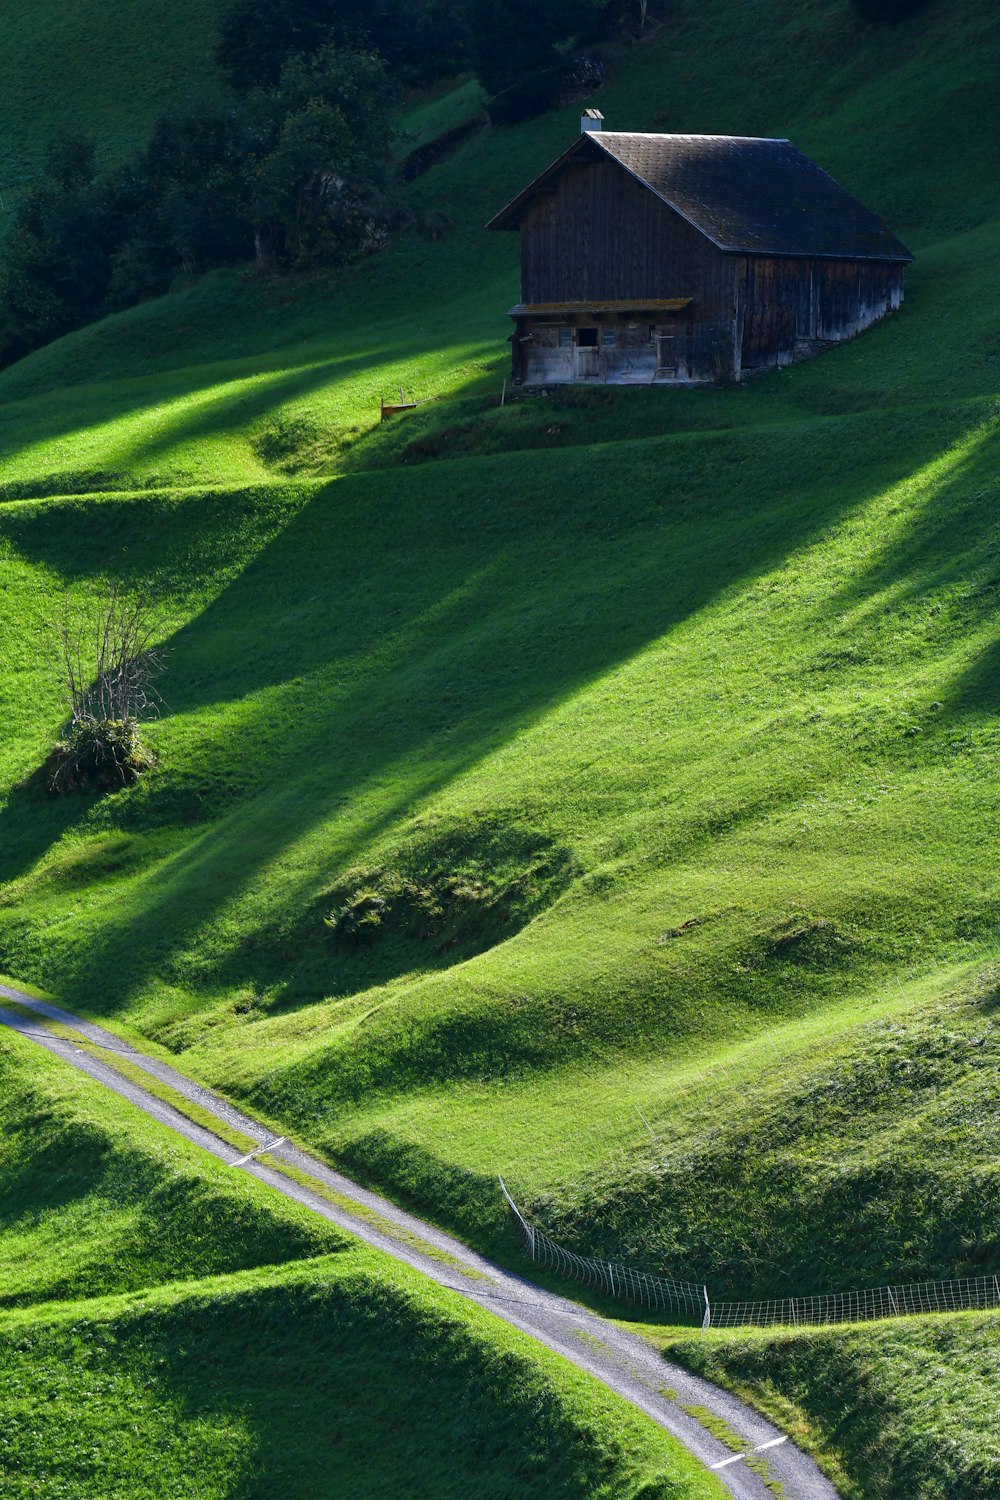 a grassy hill with a small house on top of it